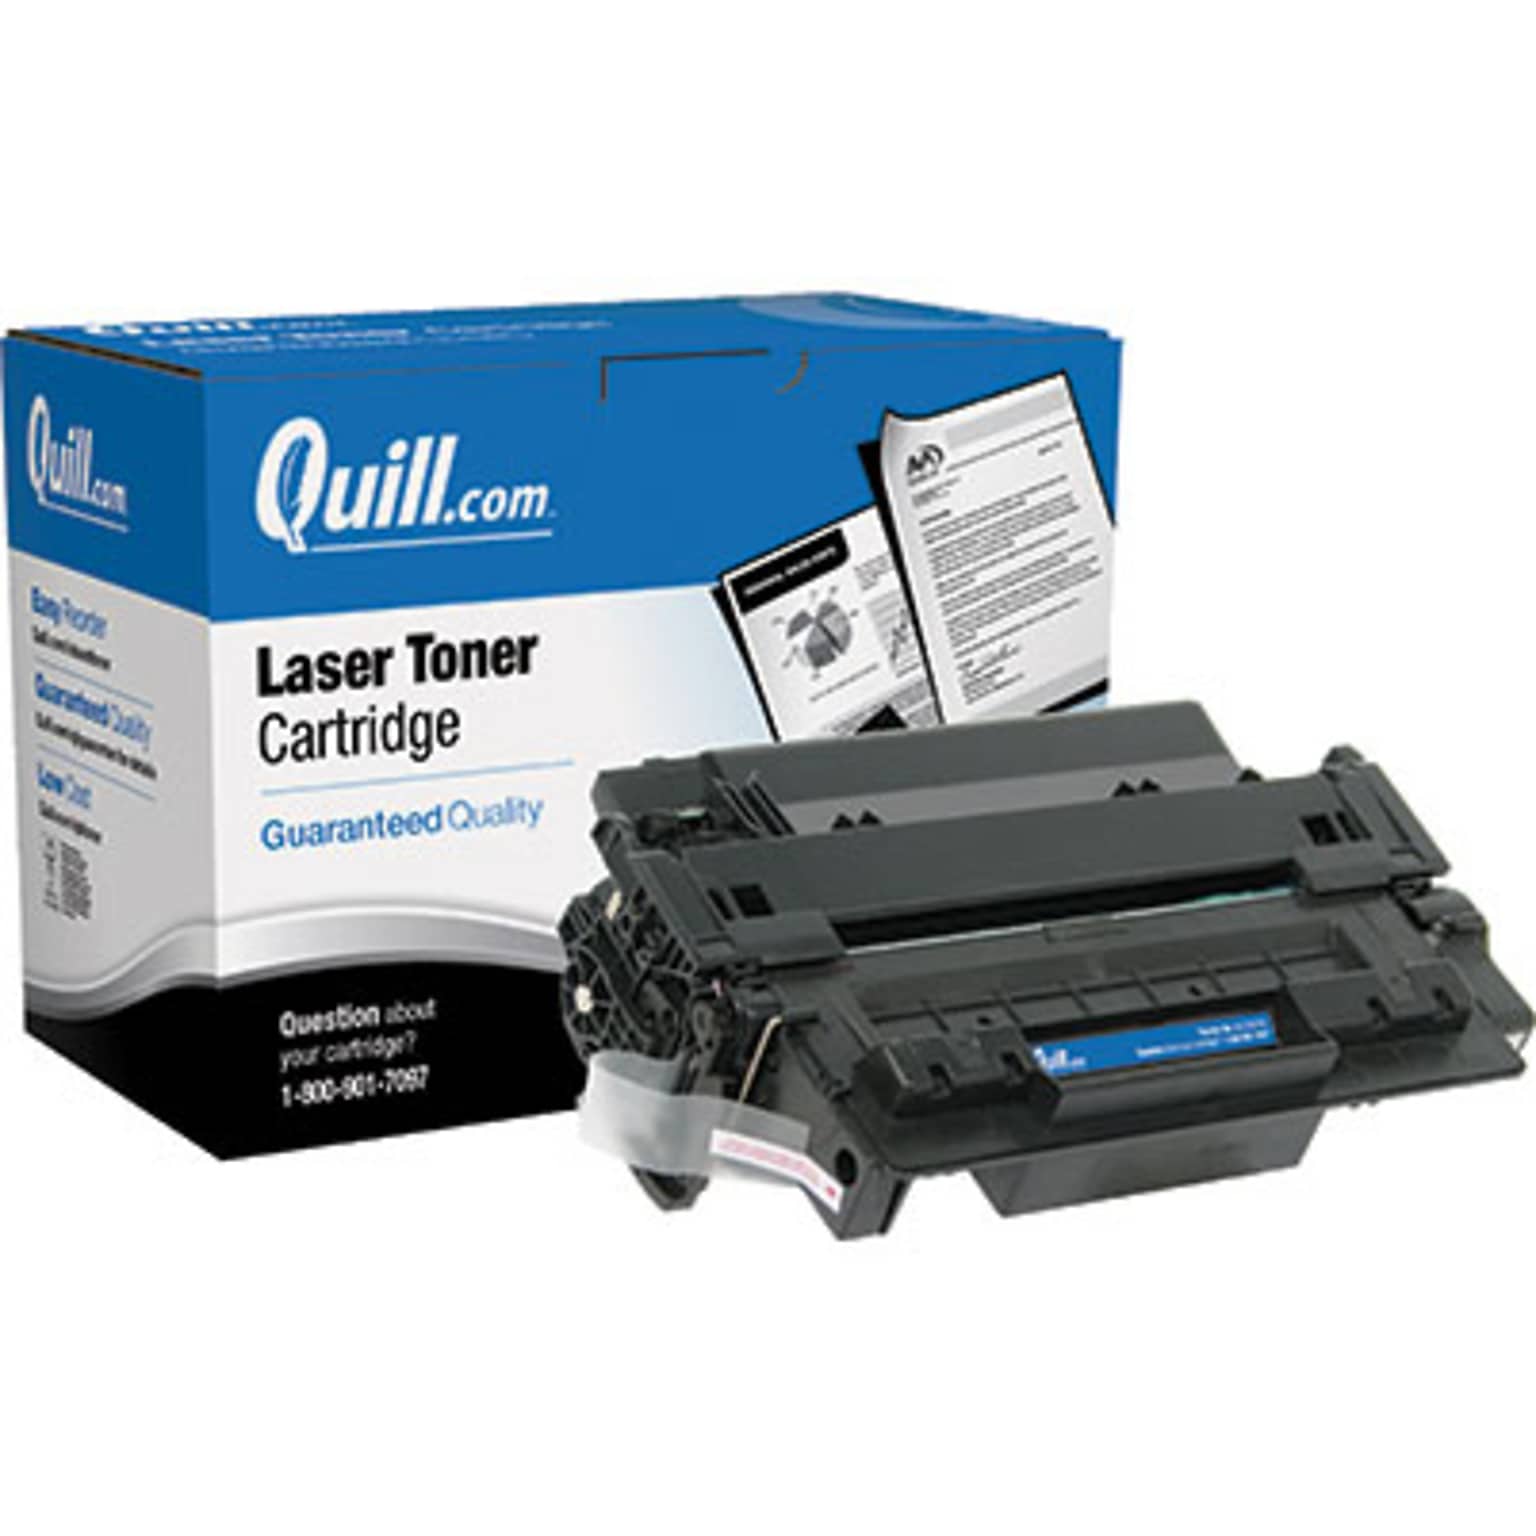 Quill Brand Remanufactured HP 55A (CE255A) Black Laser Toner Cartridge (100% Satisfaction Guaranteed)